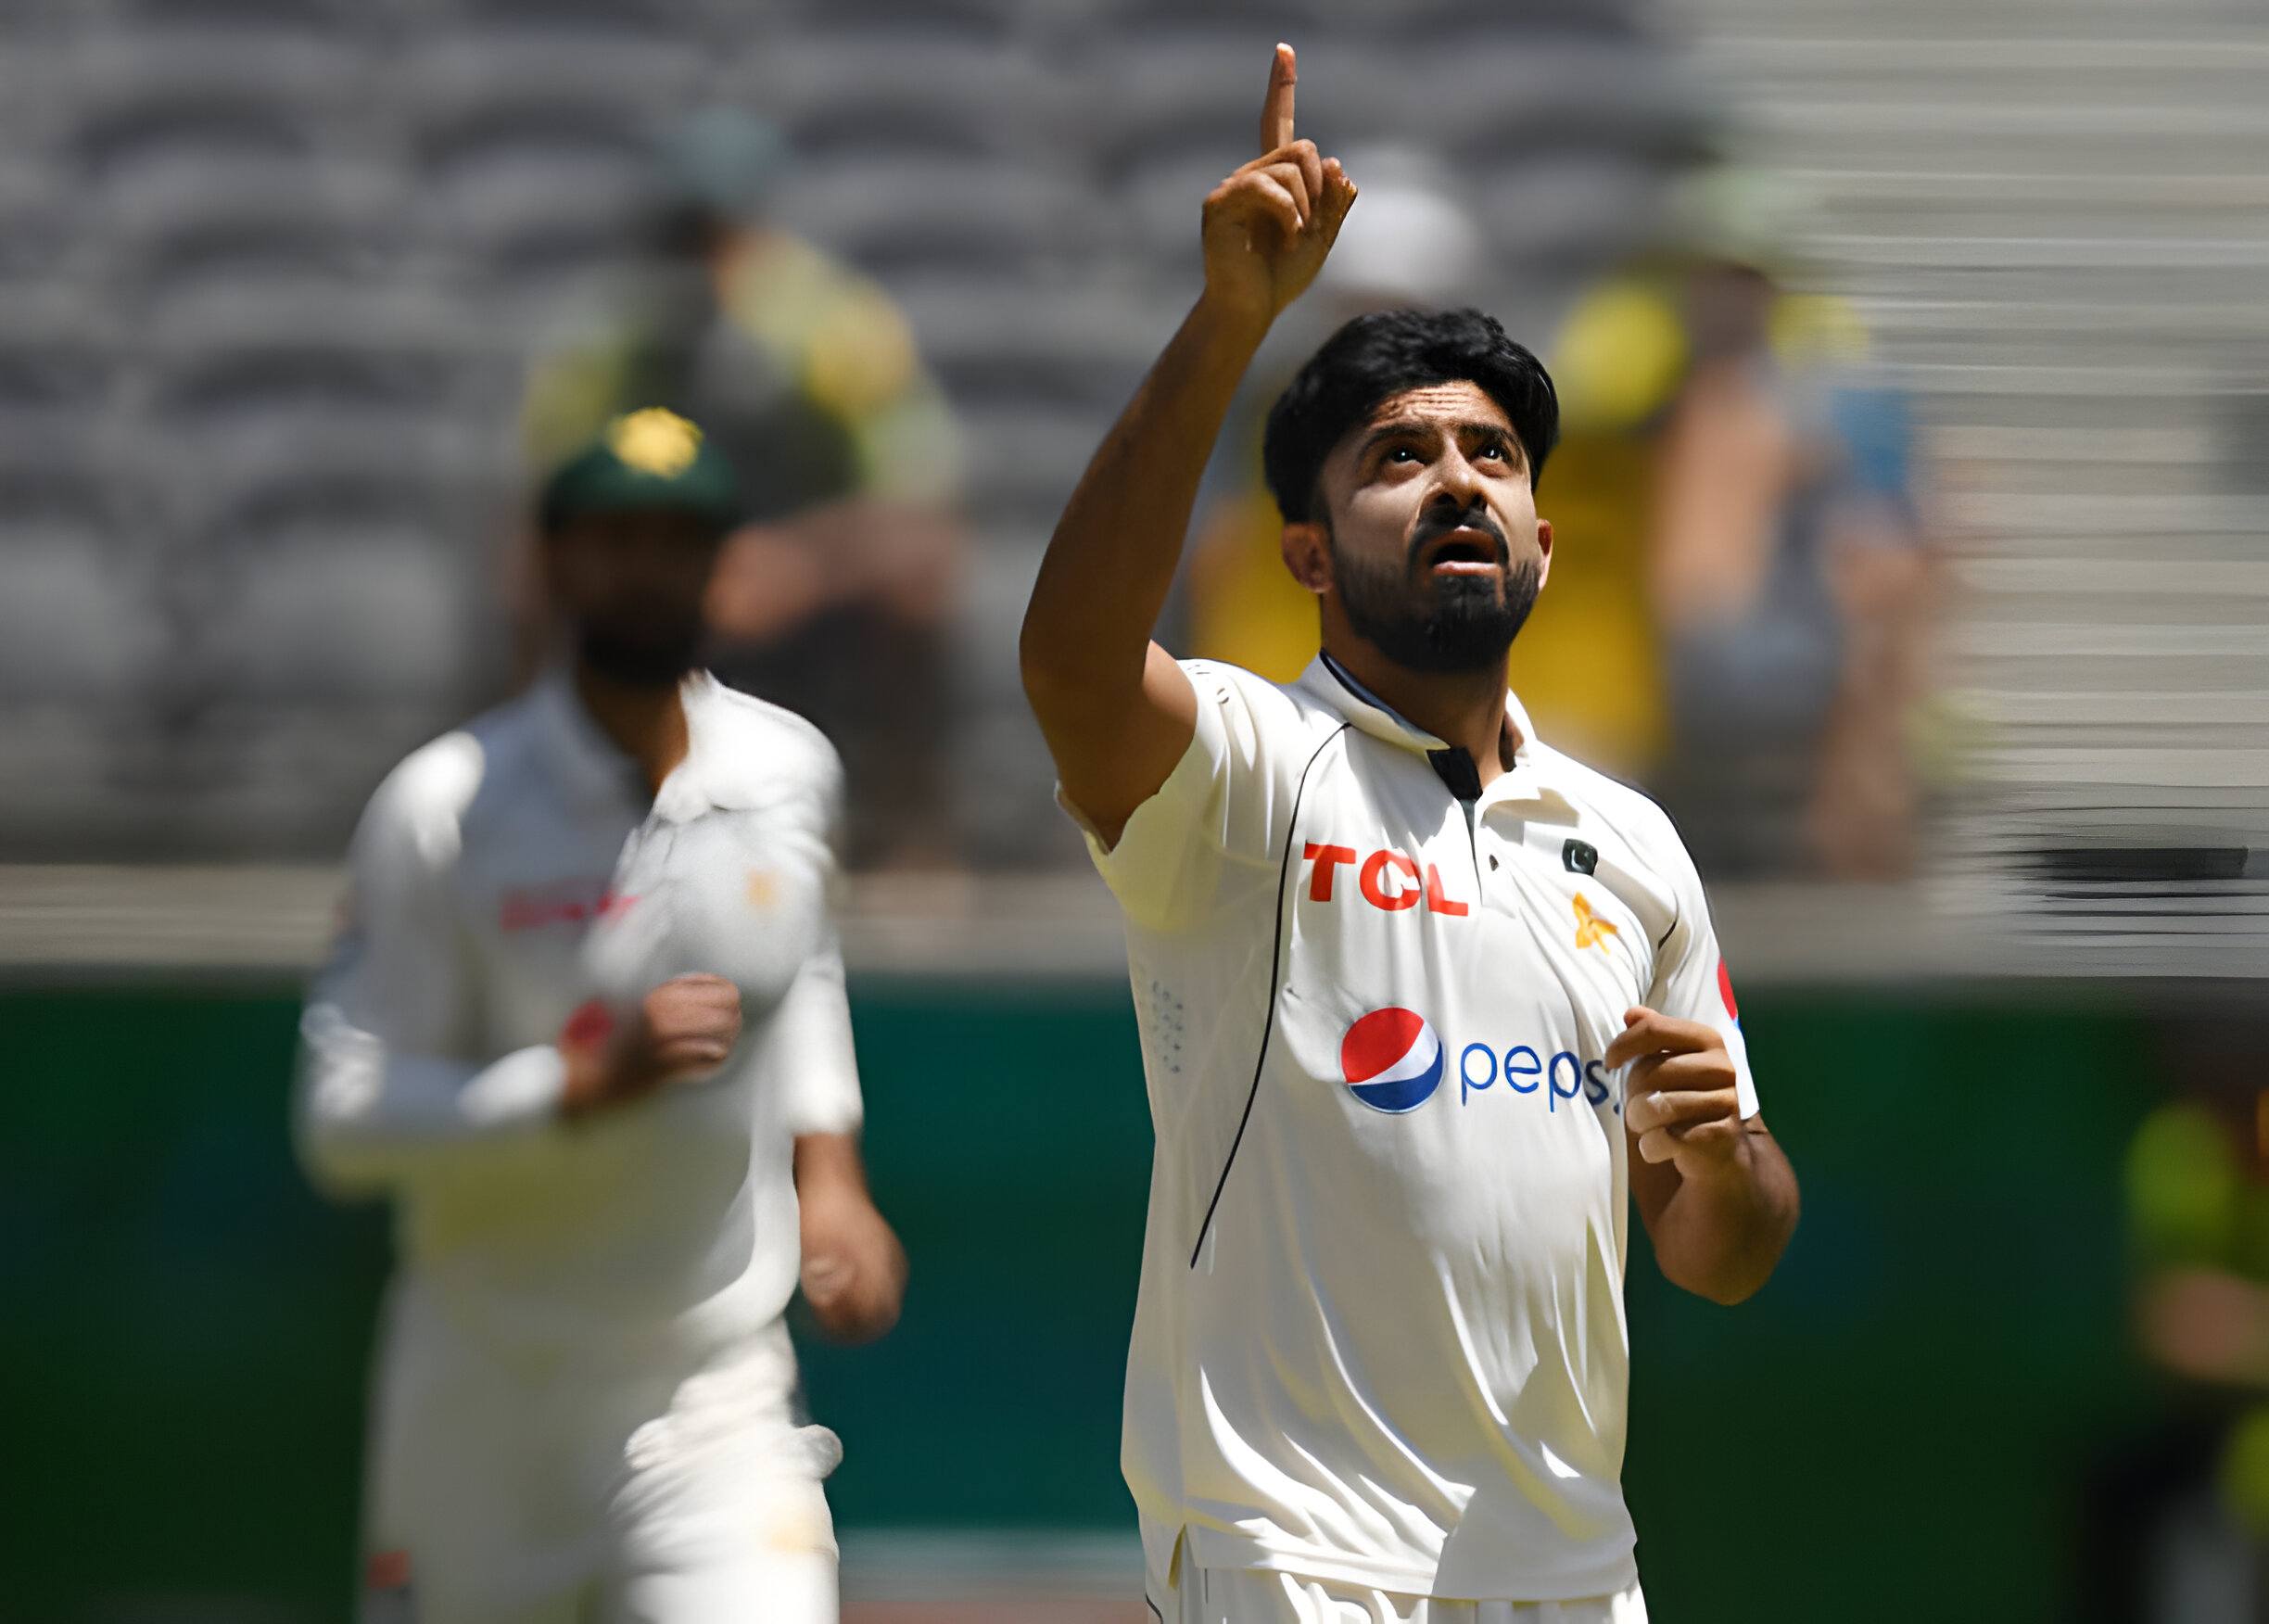 Aamer Jamal Second Pakistani Player to Achieve a Fiver Against Australia in Perth Test